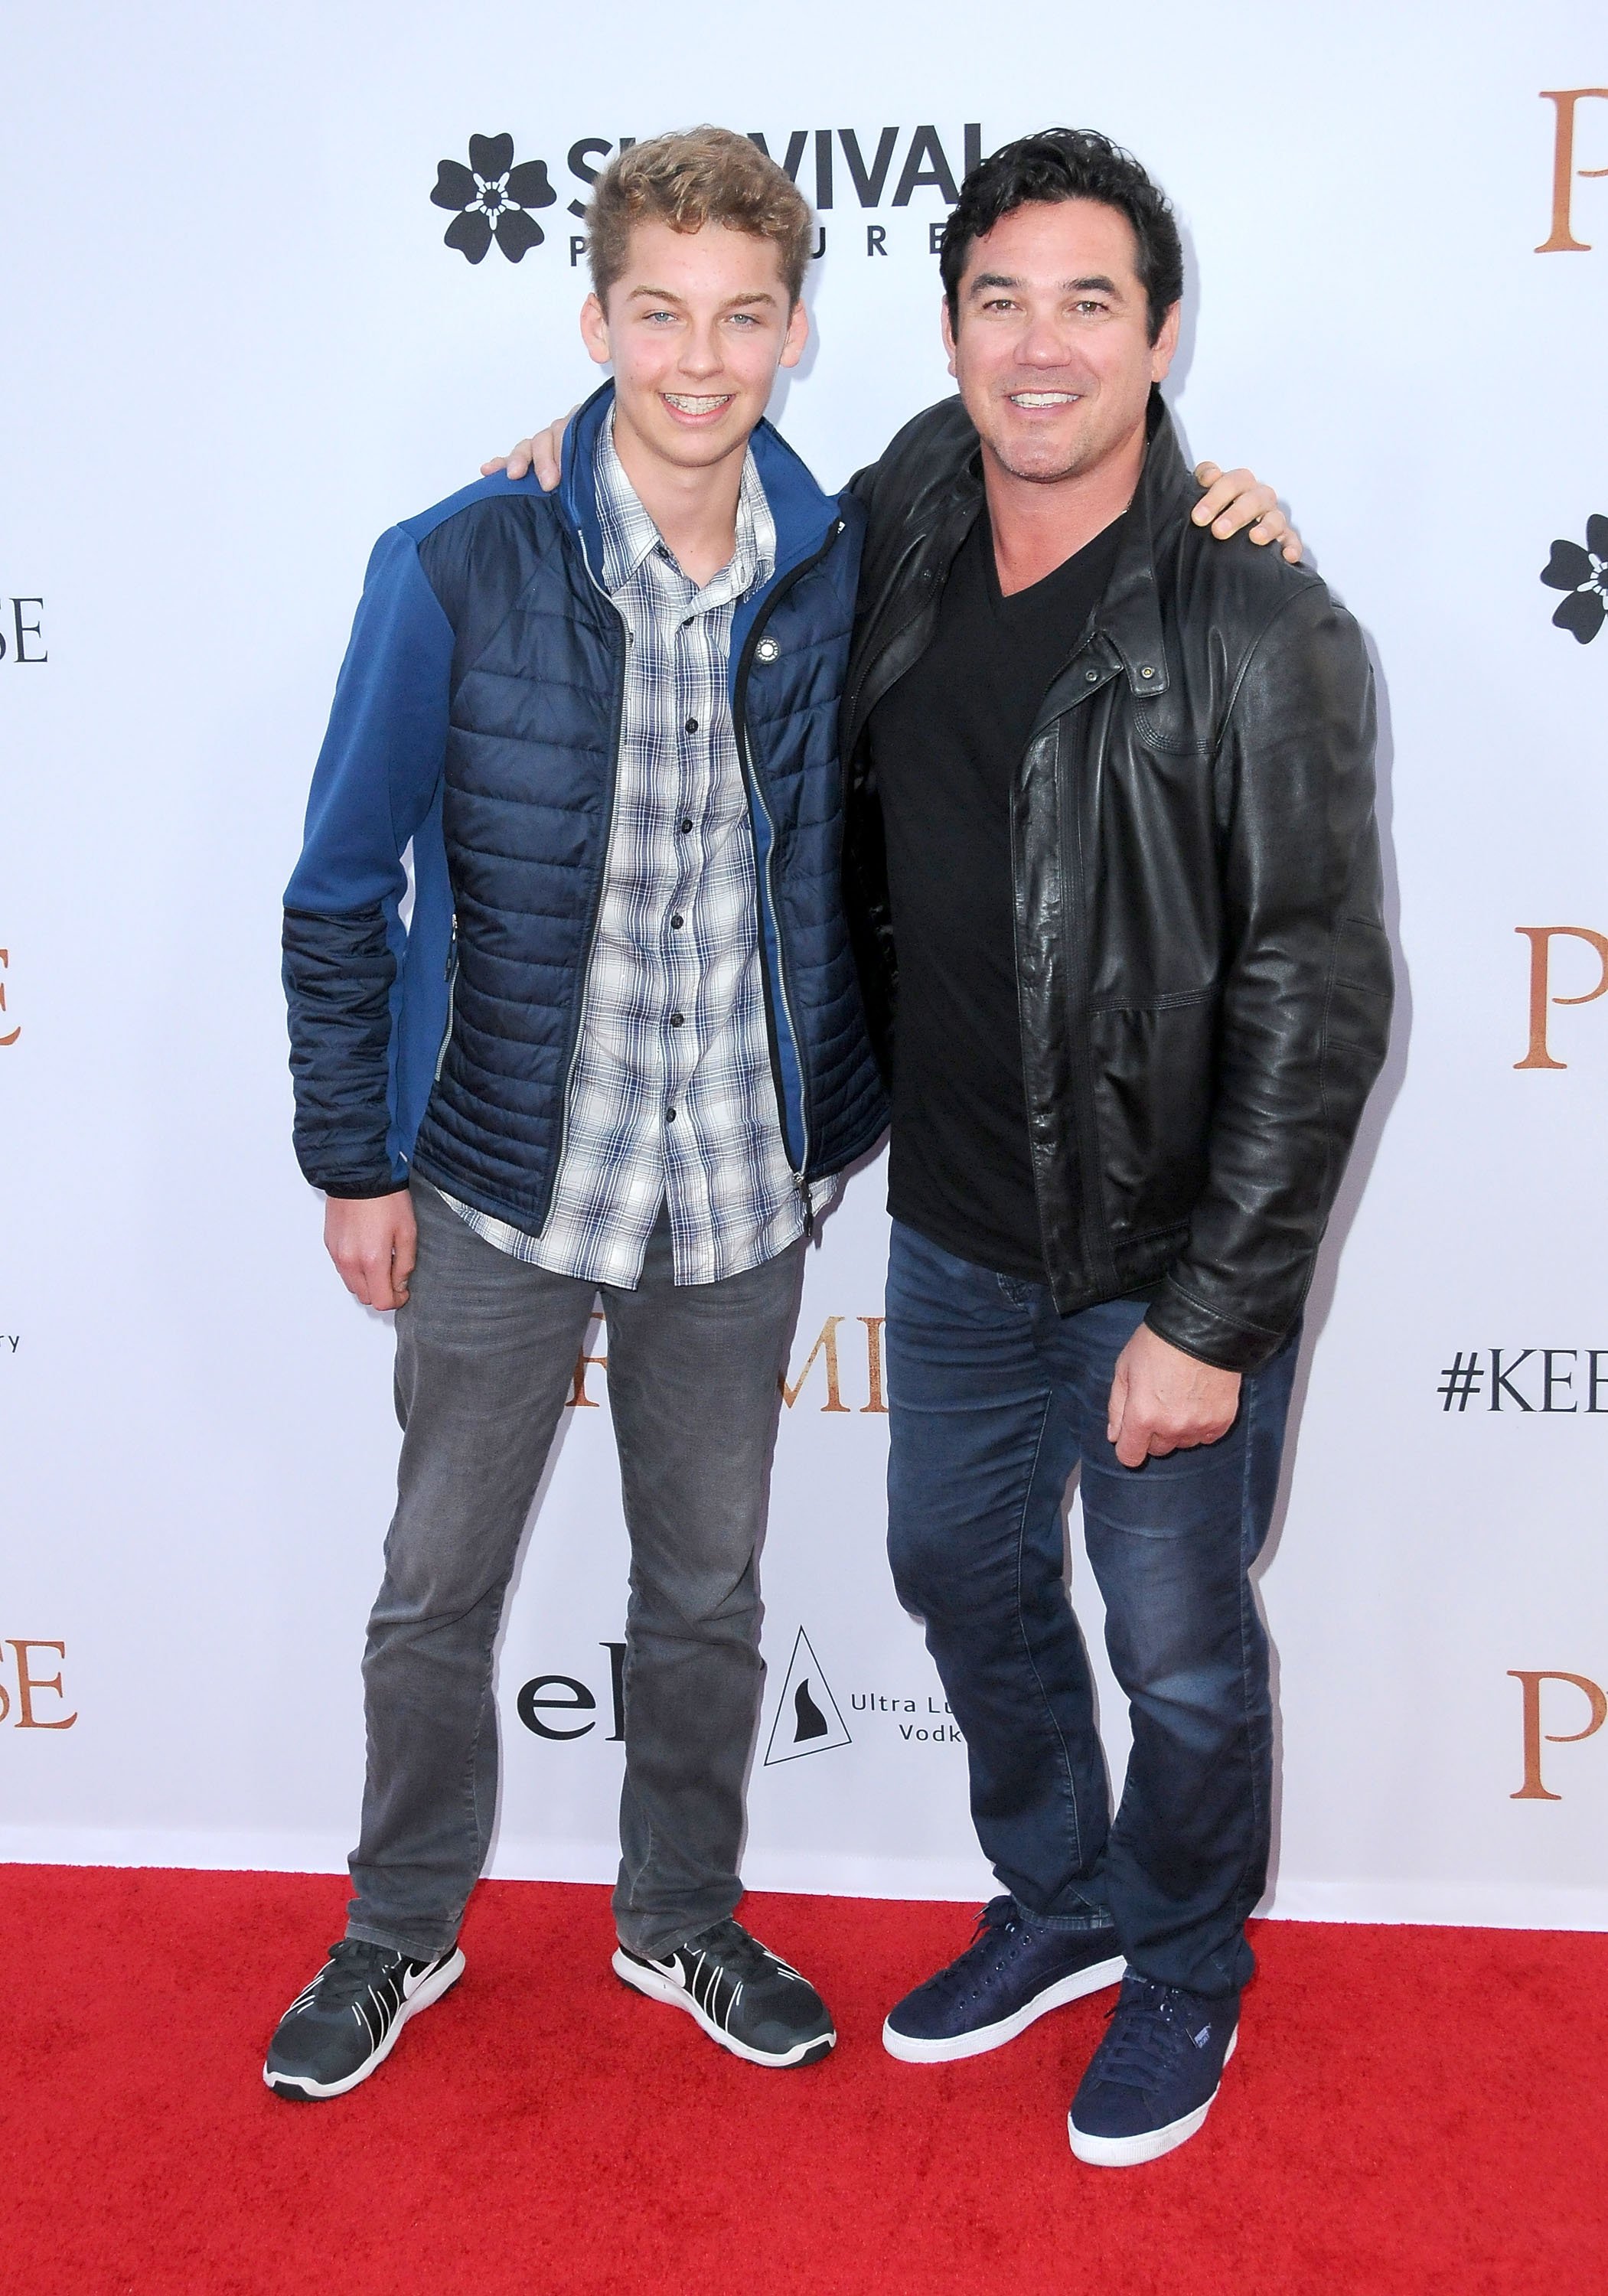 Dean Cain and Christopher Dean Cain attend the premiere of Open Roads Films' 'The Promise' at TCL Chinese Theatre on April 12, 2017, in Hollywood, California. | Source: Getty Images